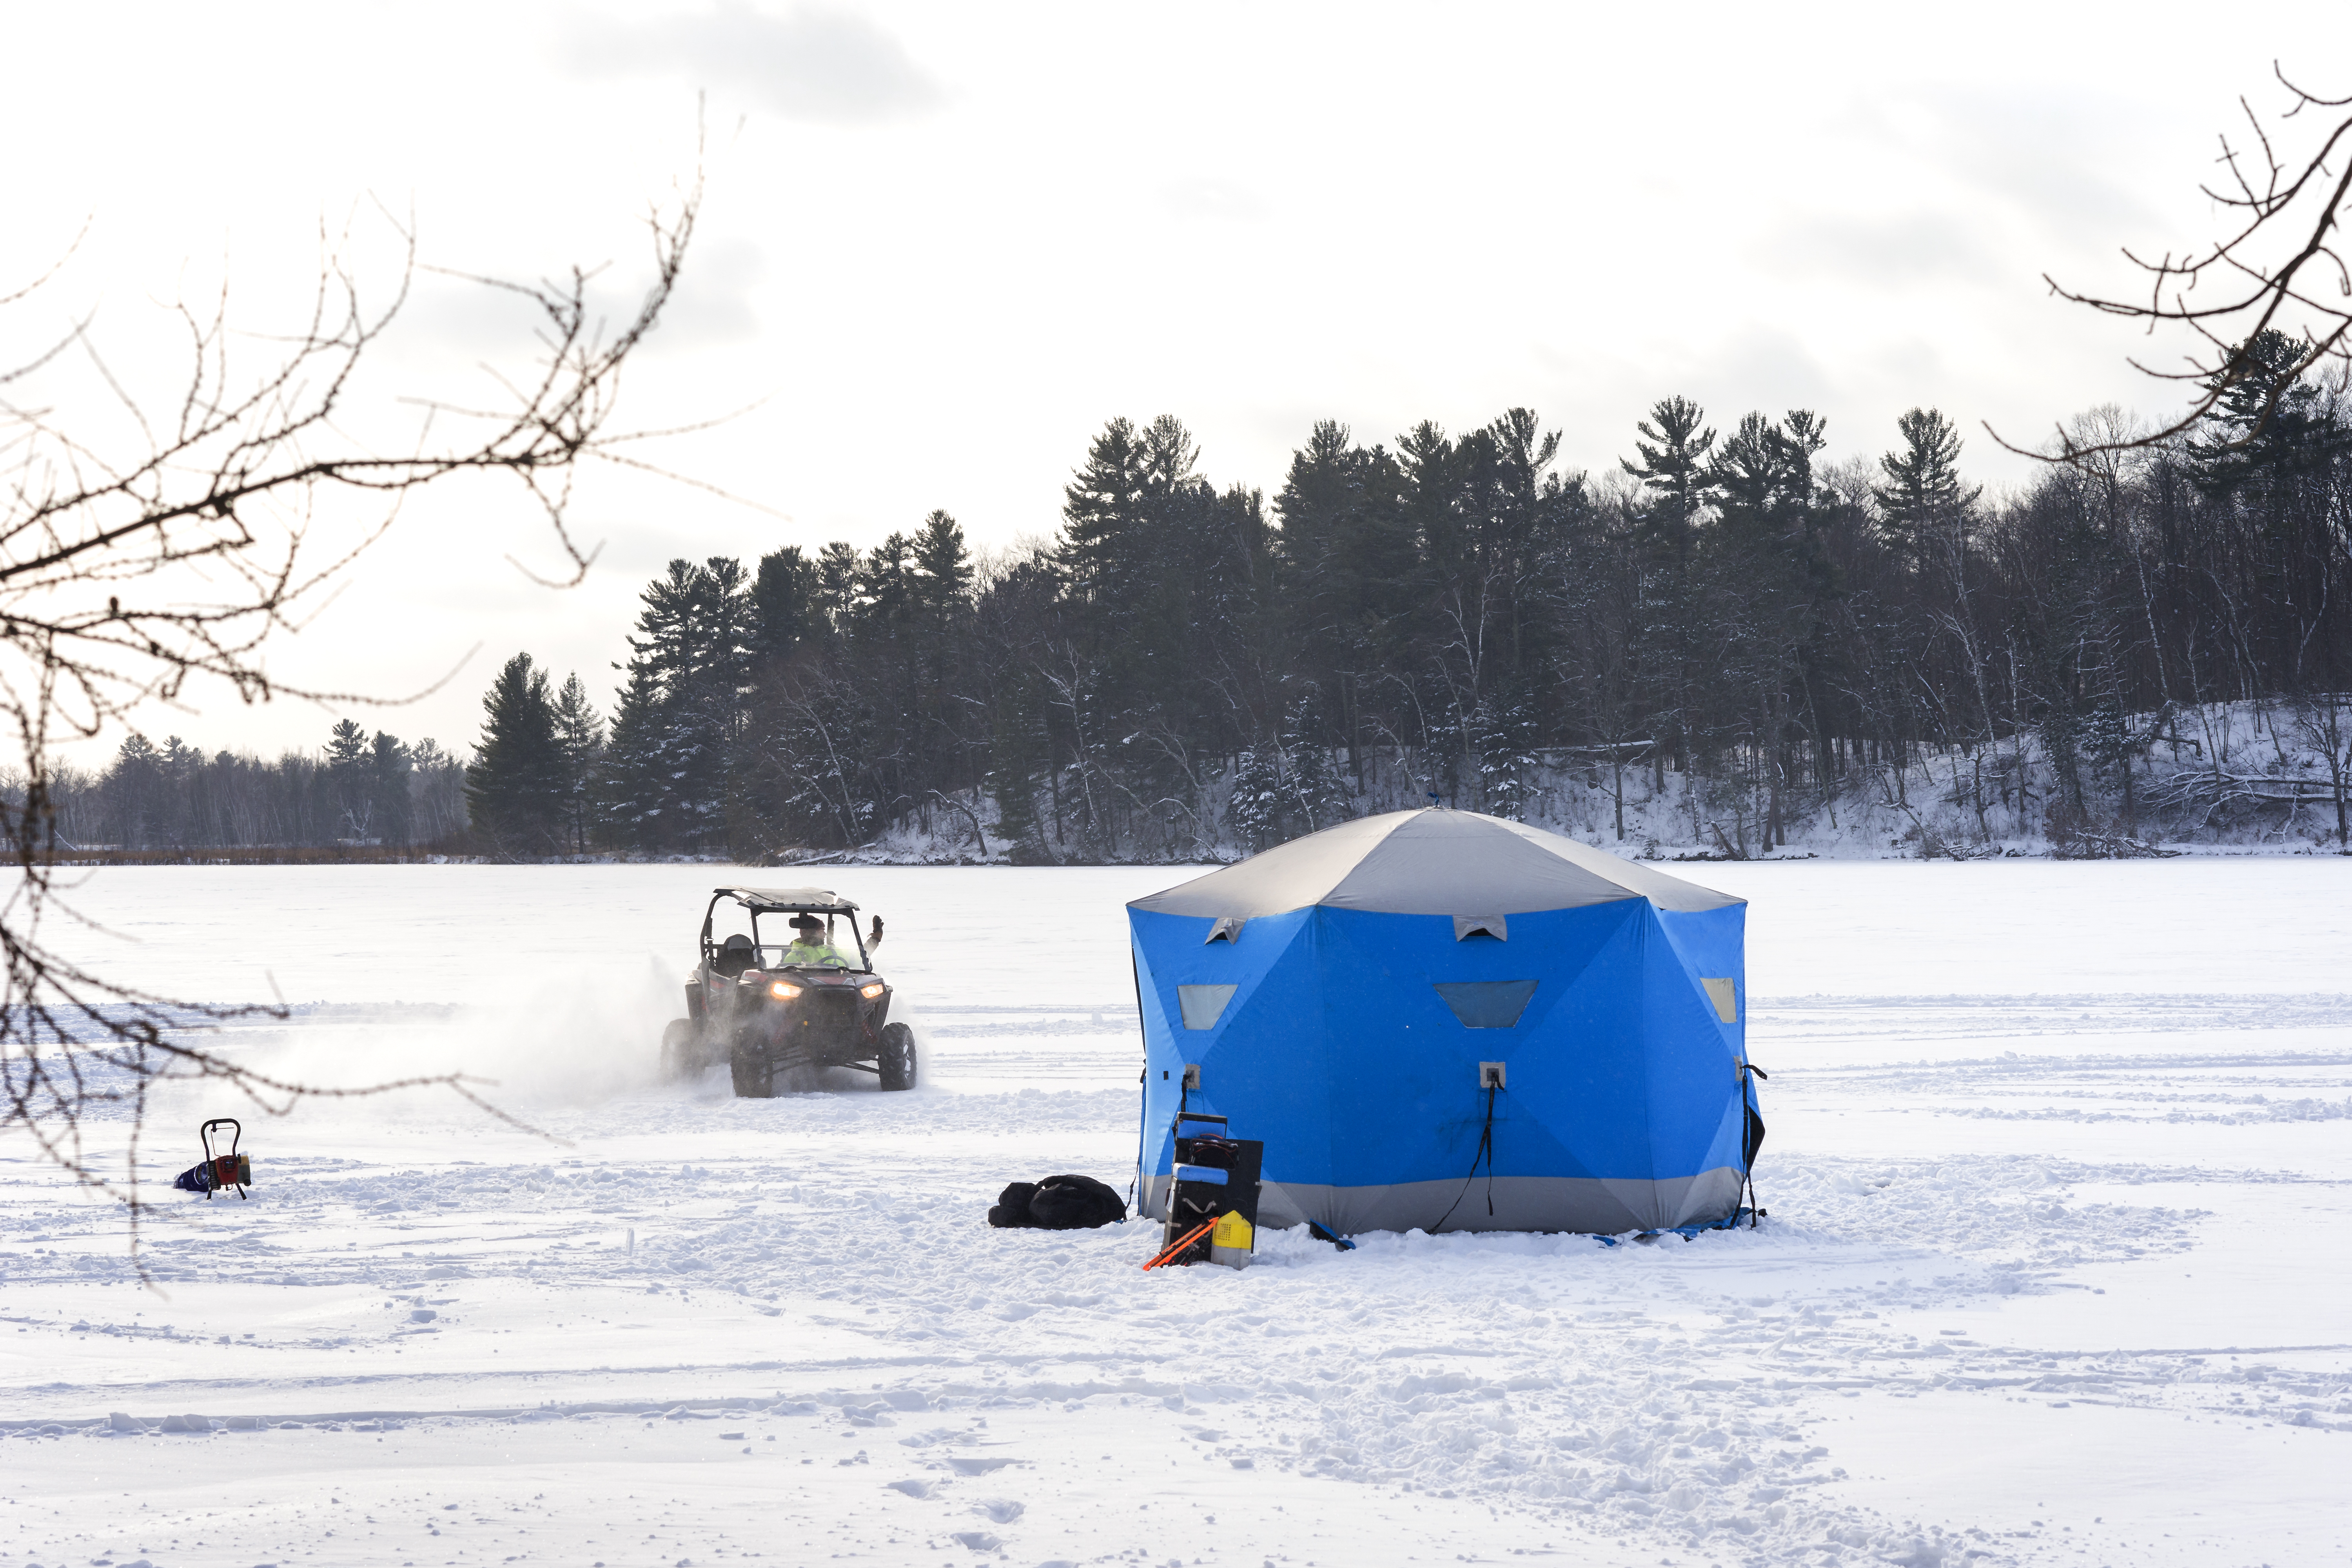 Four wheeler vehicle approaches a blue ice fishing hut erected on a frozen lake on a subzero winter day in northern Minnesota, USA